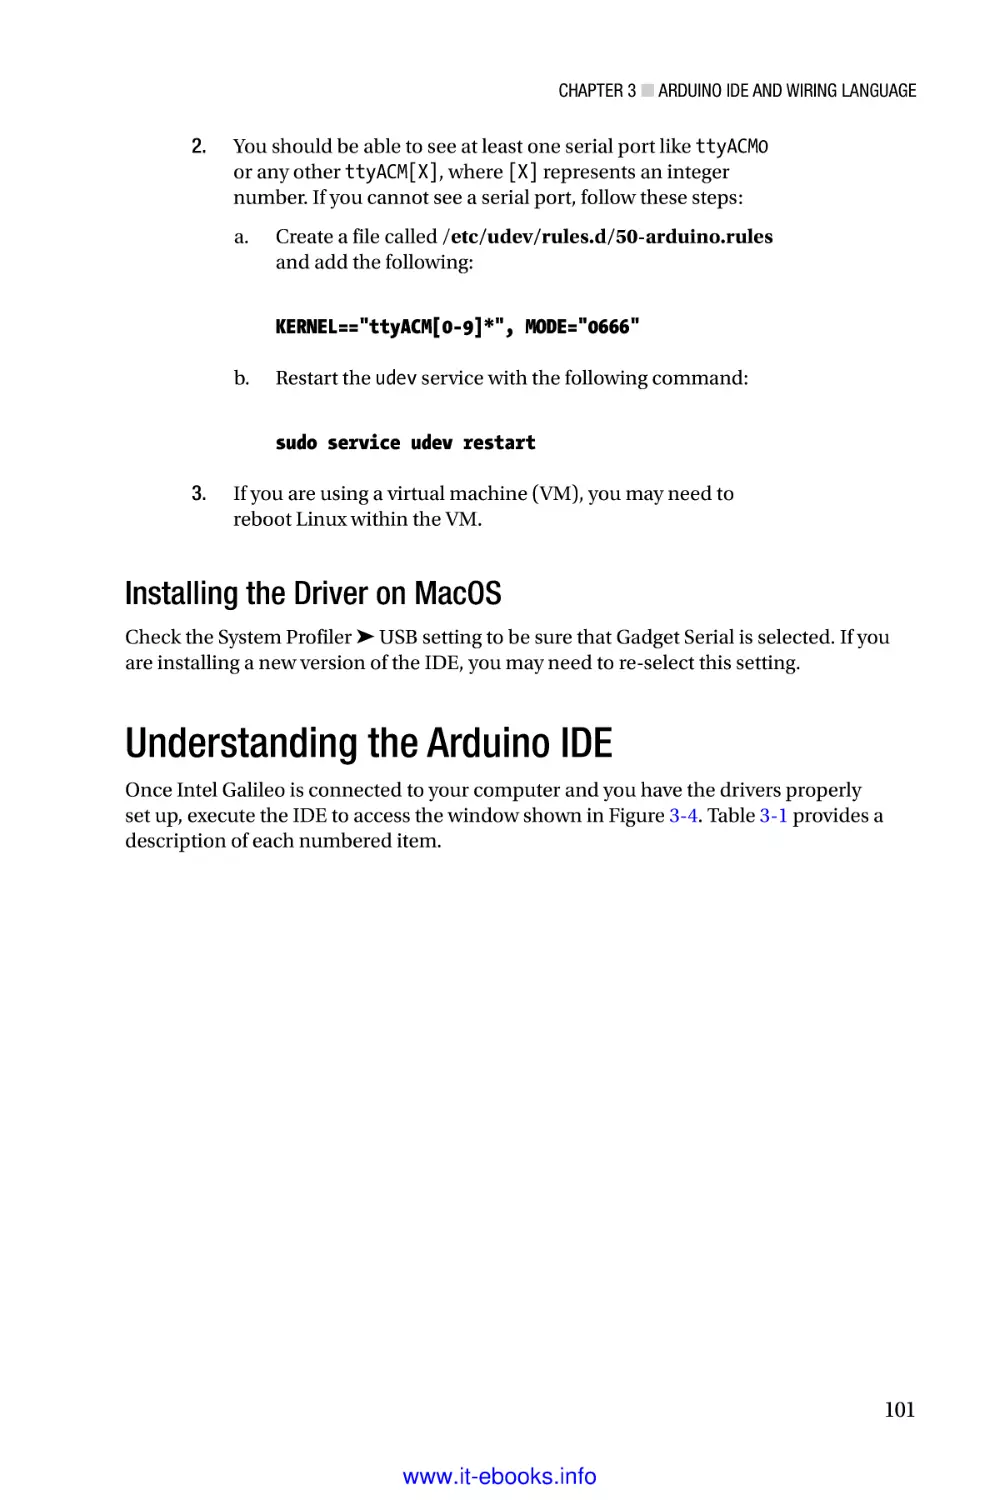 Installing the Driver on MacOS
Understanding the Arduino IDE